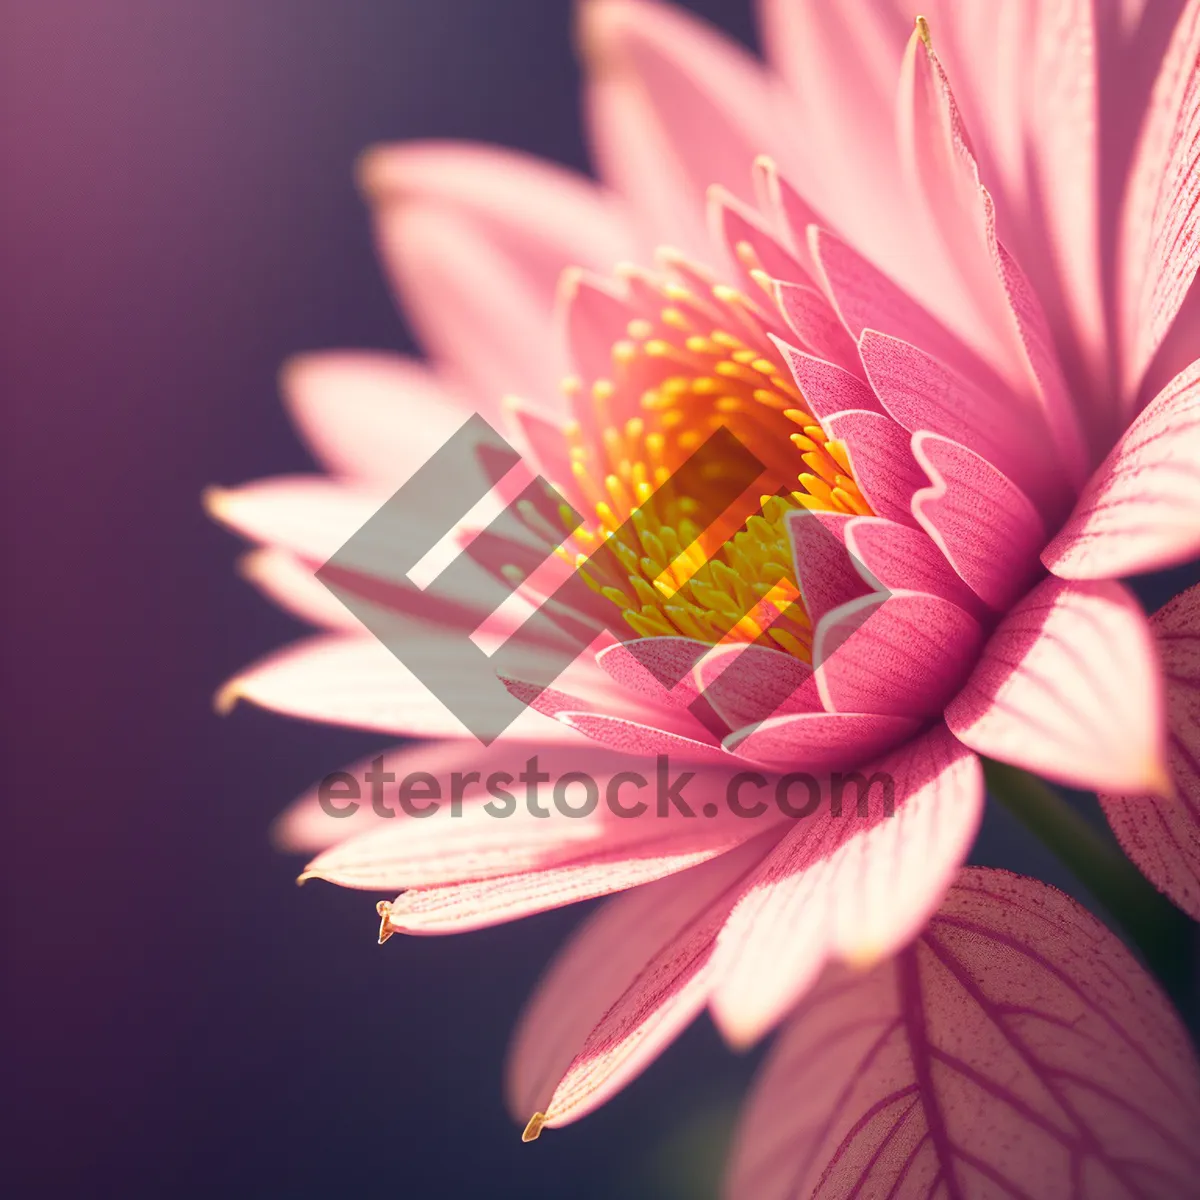 Picture of Vibrant Summer Lotus Bloom - Closeup Floral Detail